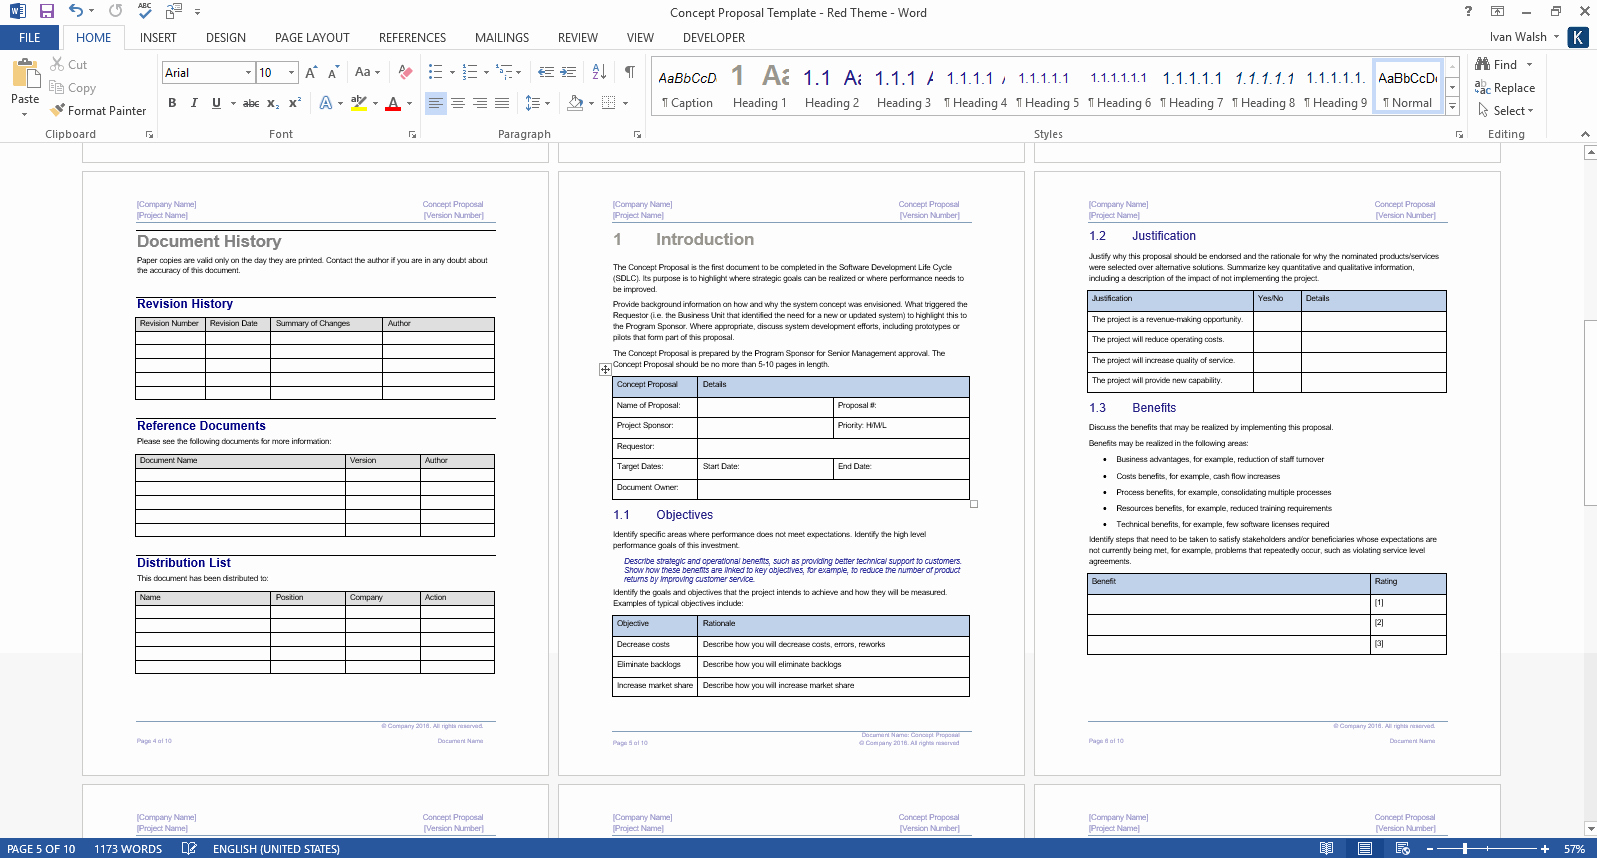 Free Microsoft Word Templates Elegant Concept Proposal Template Ms Word Excel Spreadsheets